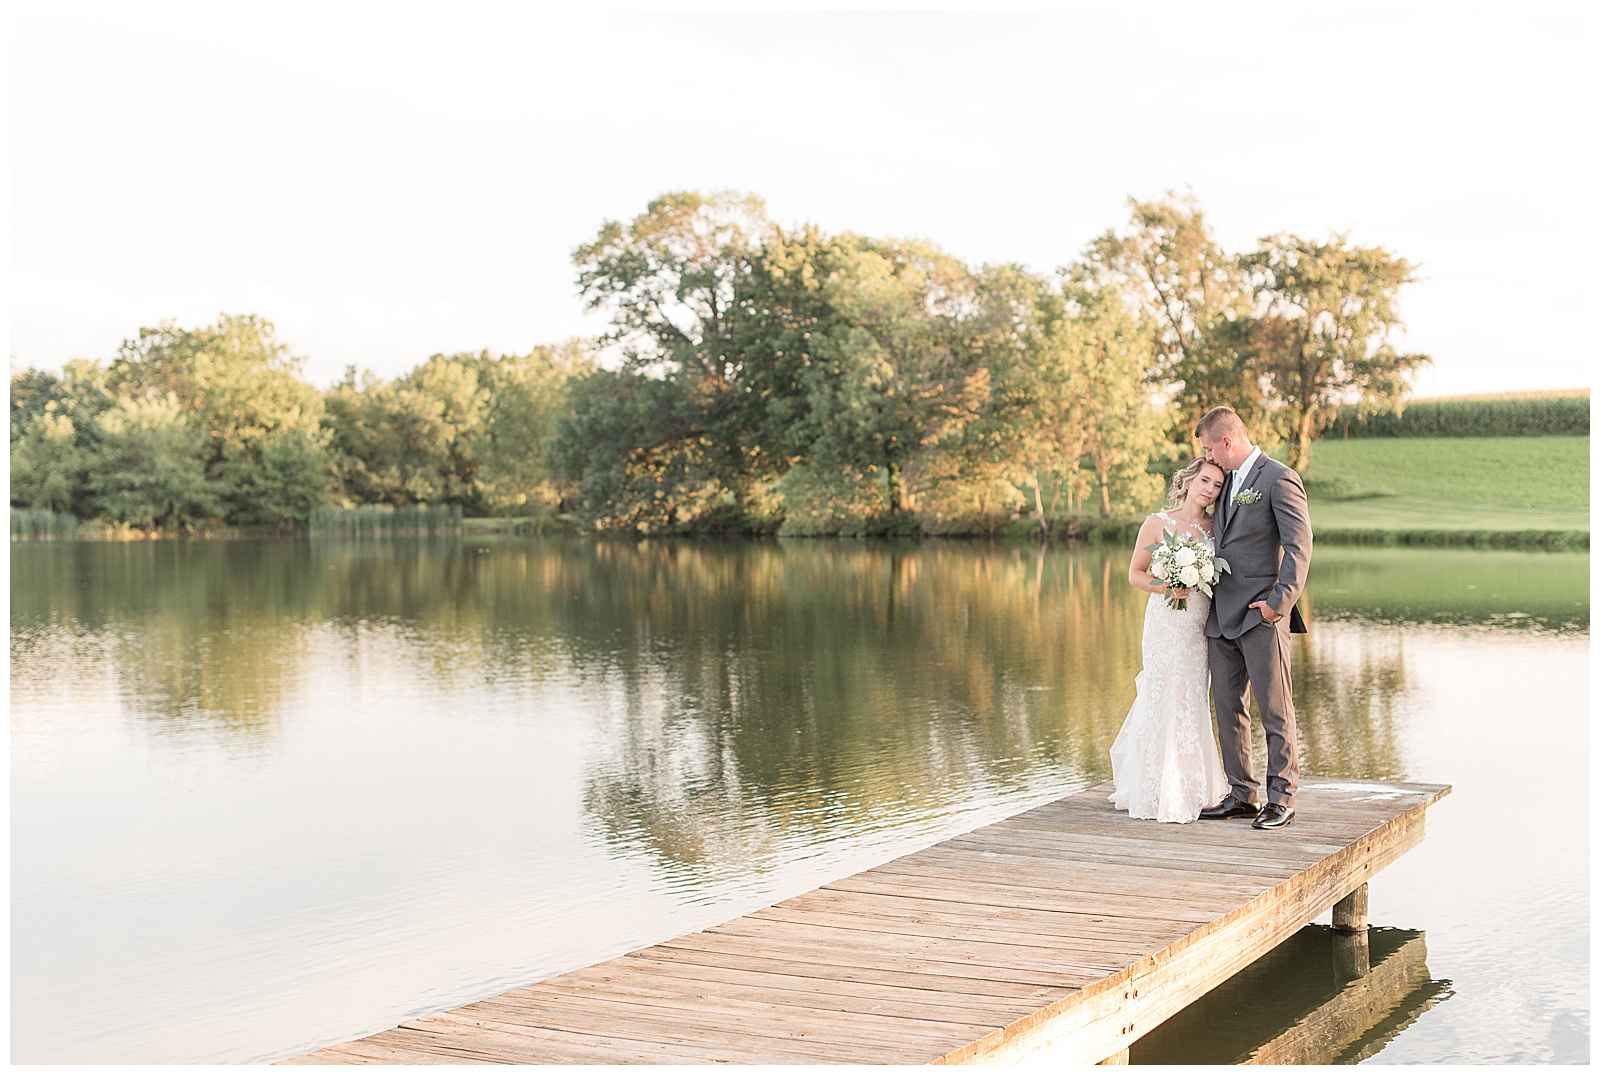 the couple is standing at the end of the dock on the pond with trees behind them and the bride is on the left holding her bouquet and resting her head on the groom and the groom is standing on the right with his left hand in his pocket on a sunny day at Lakefield Weddings in Manheim, PA